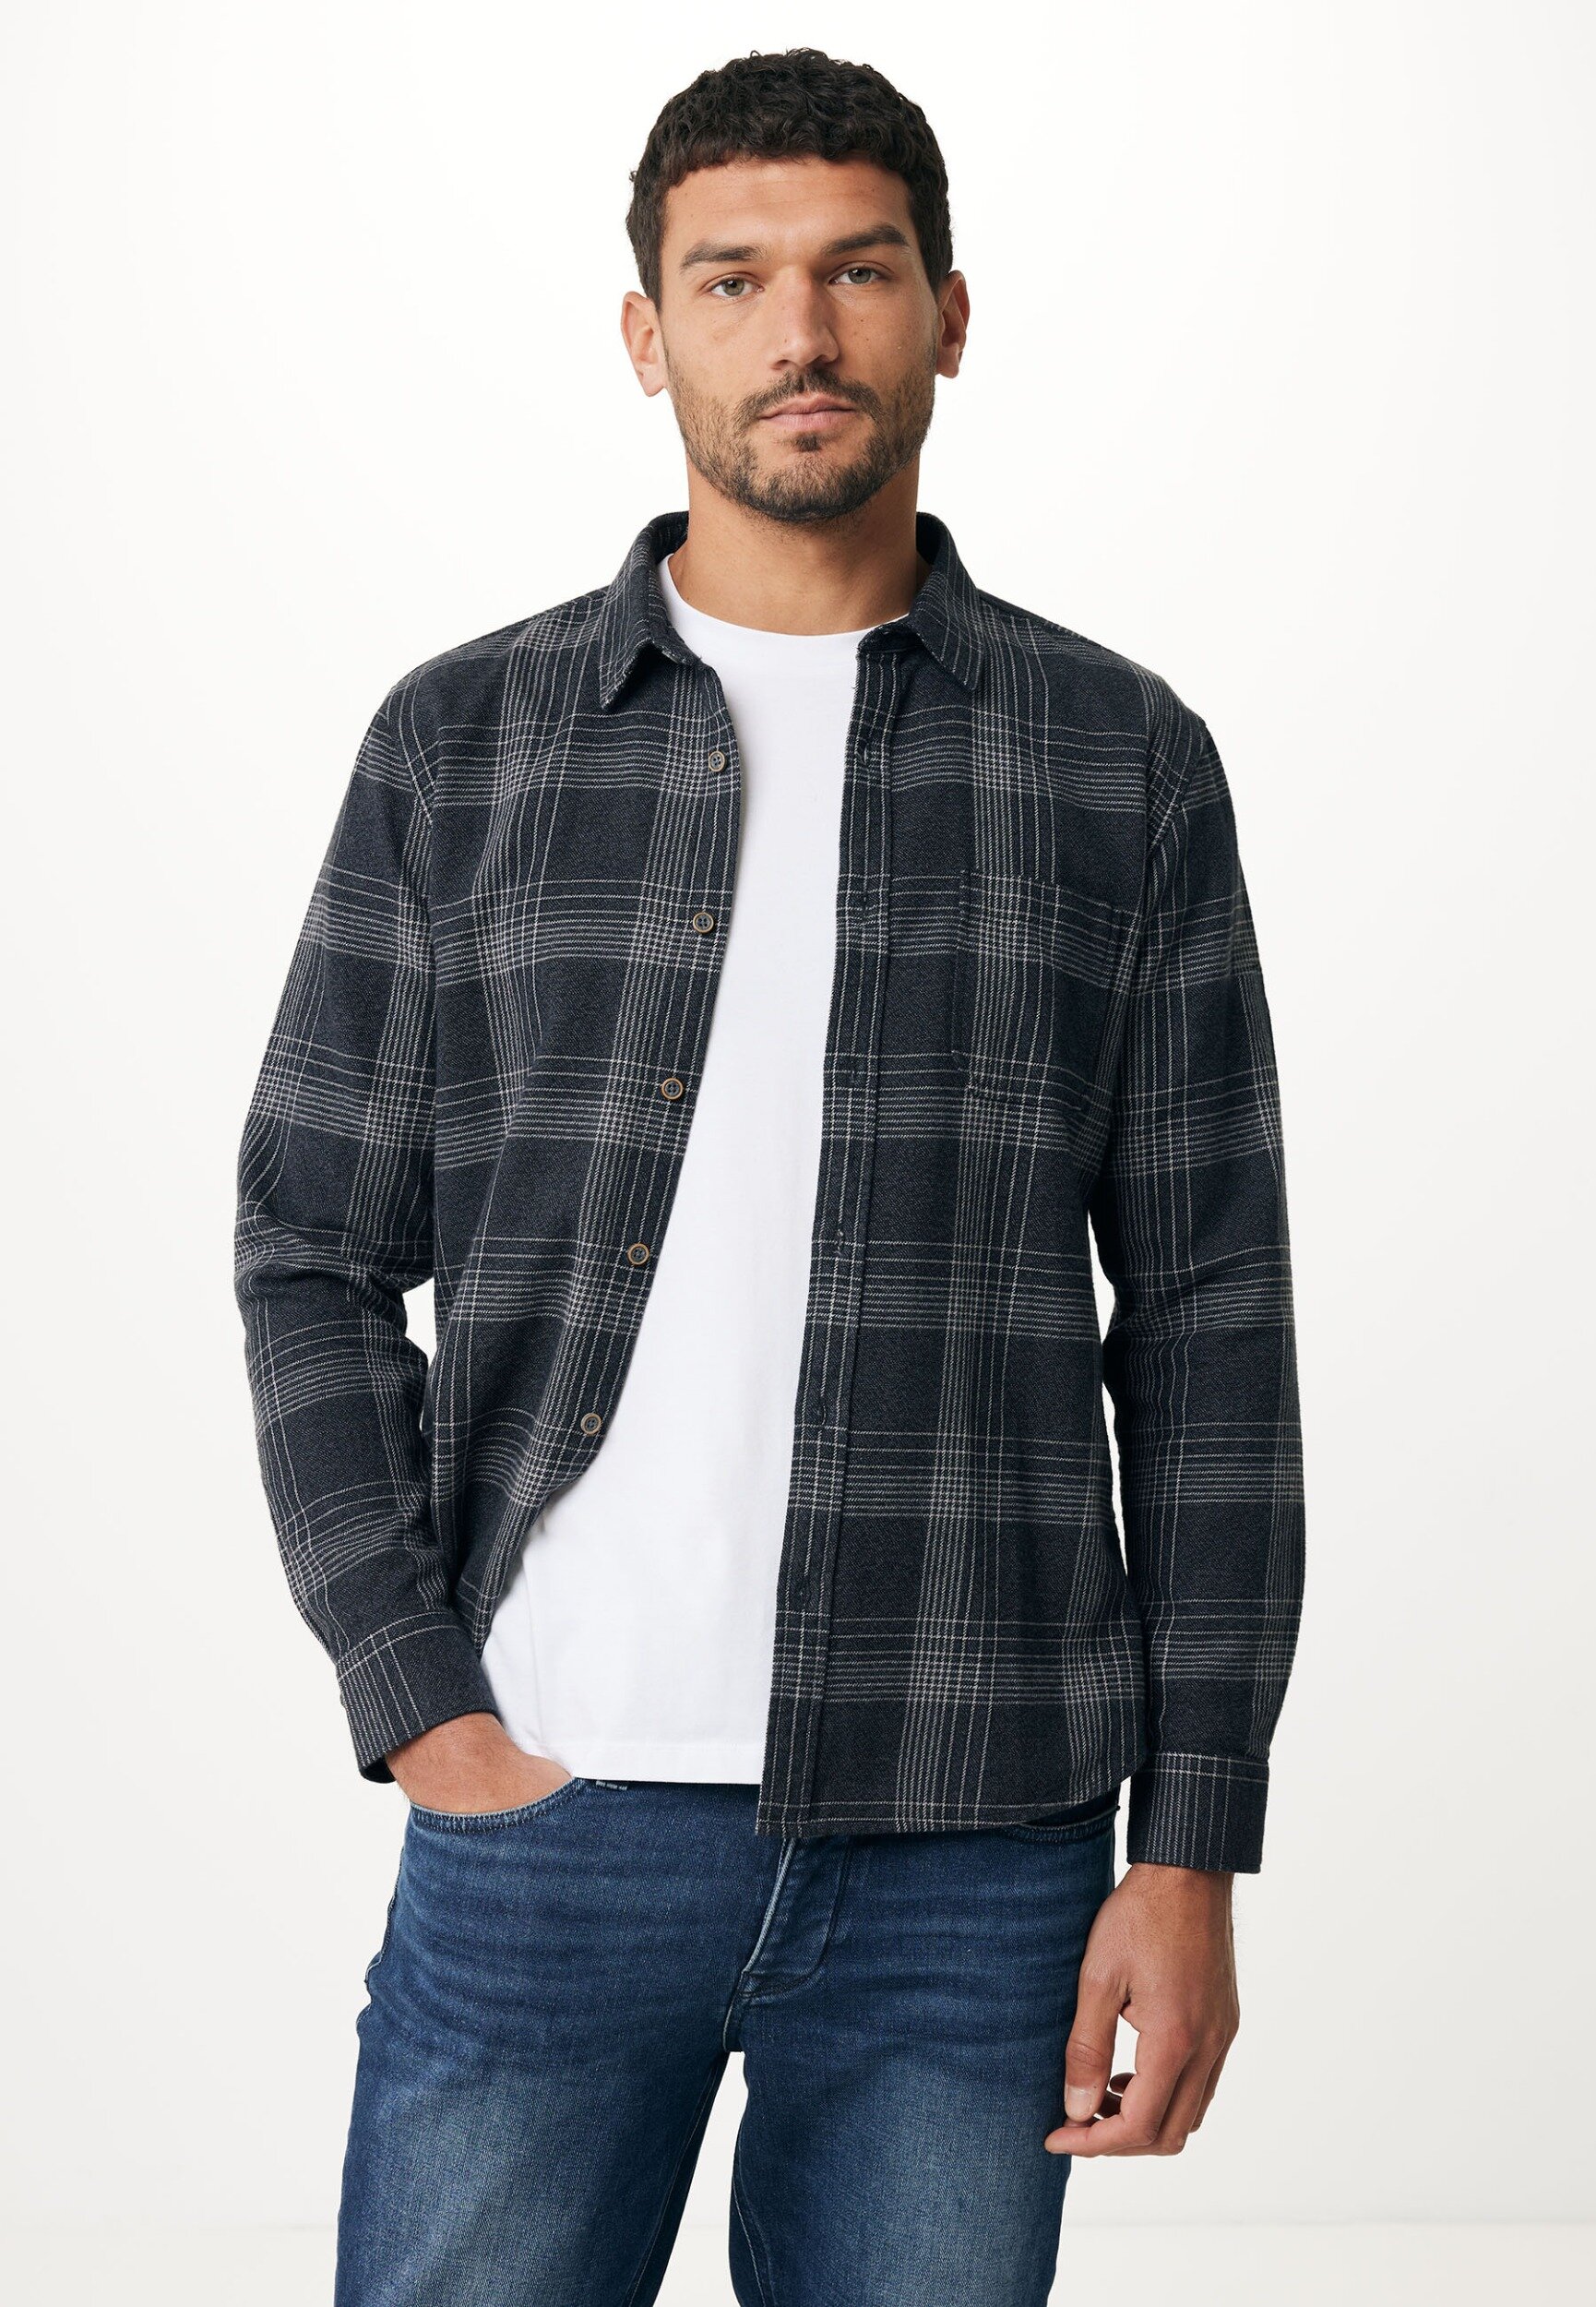 Mexx Lange Mouwen Flanel Check Overshirt With Pocket Mannen - Anthracite Melee - Maat L